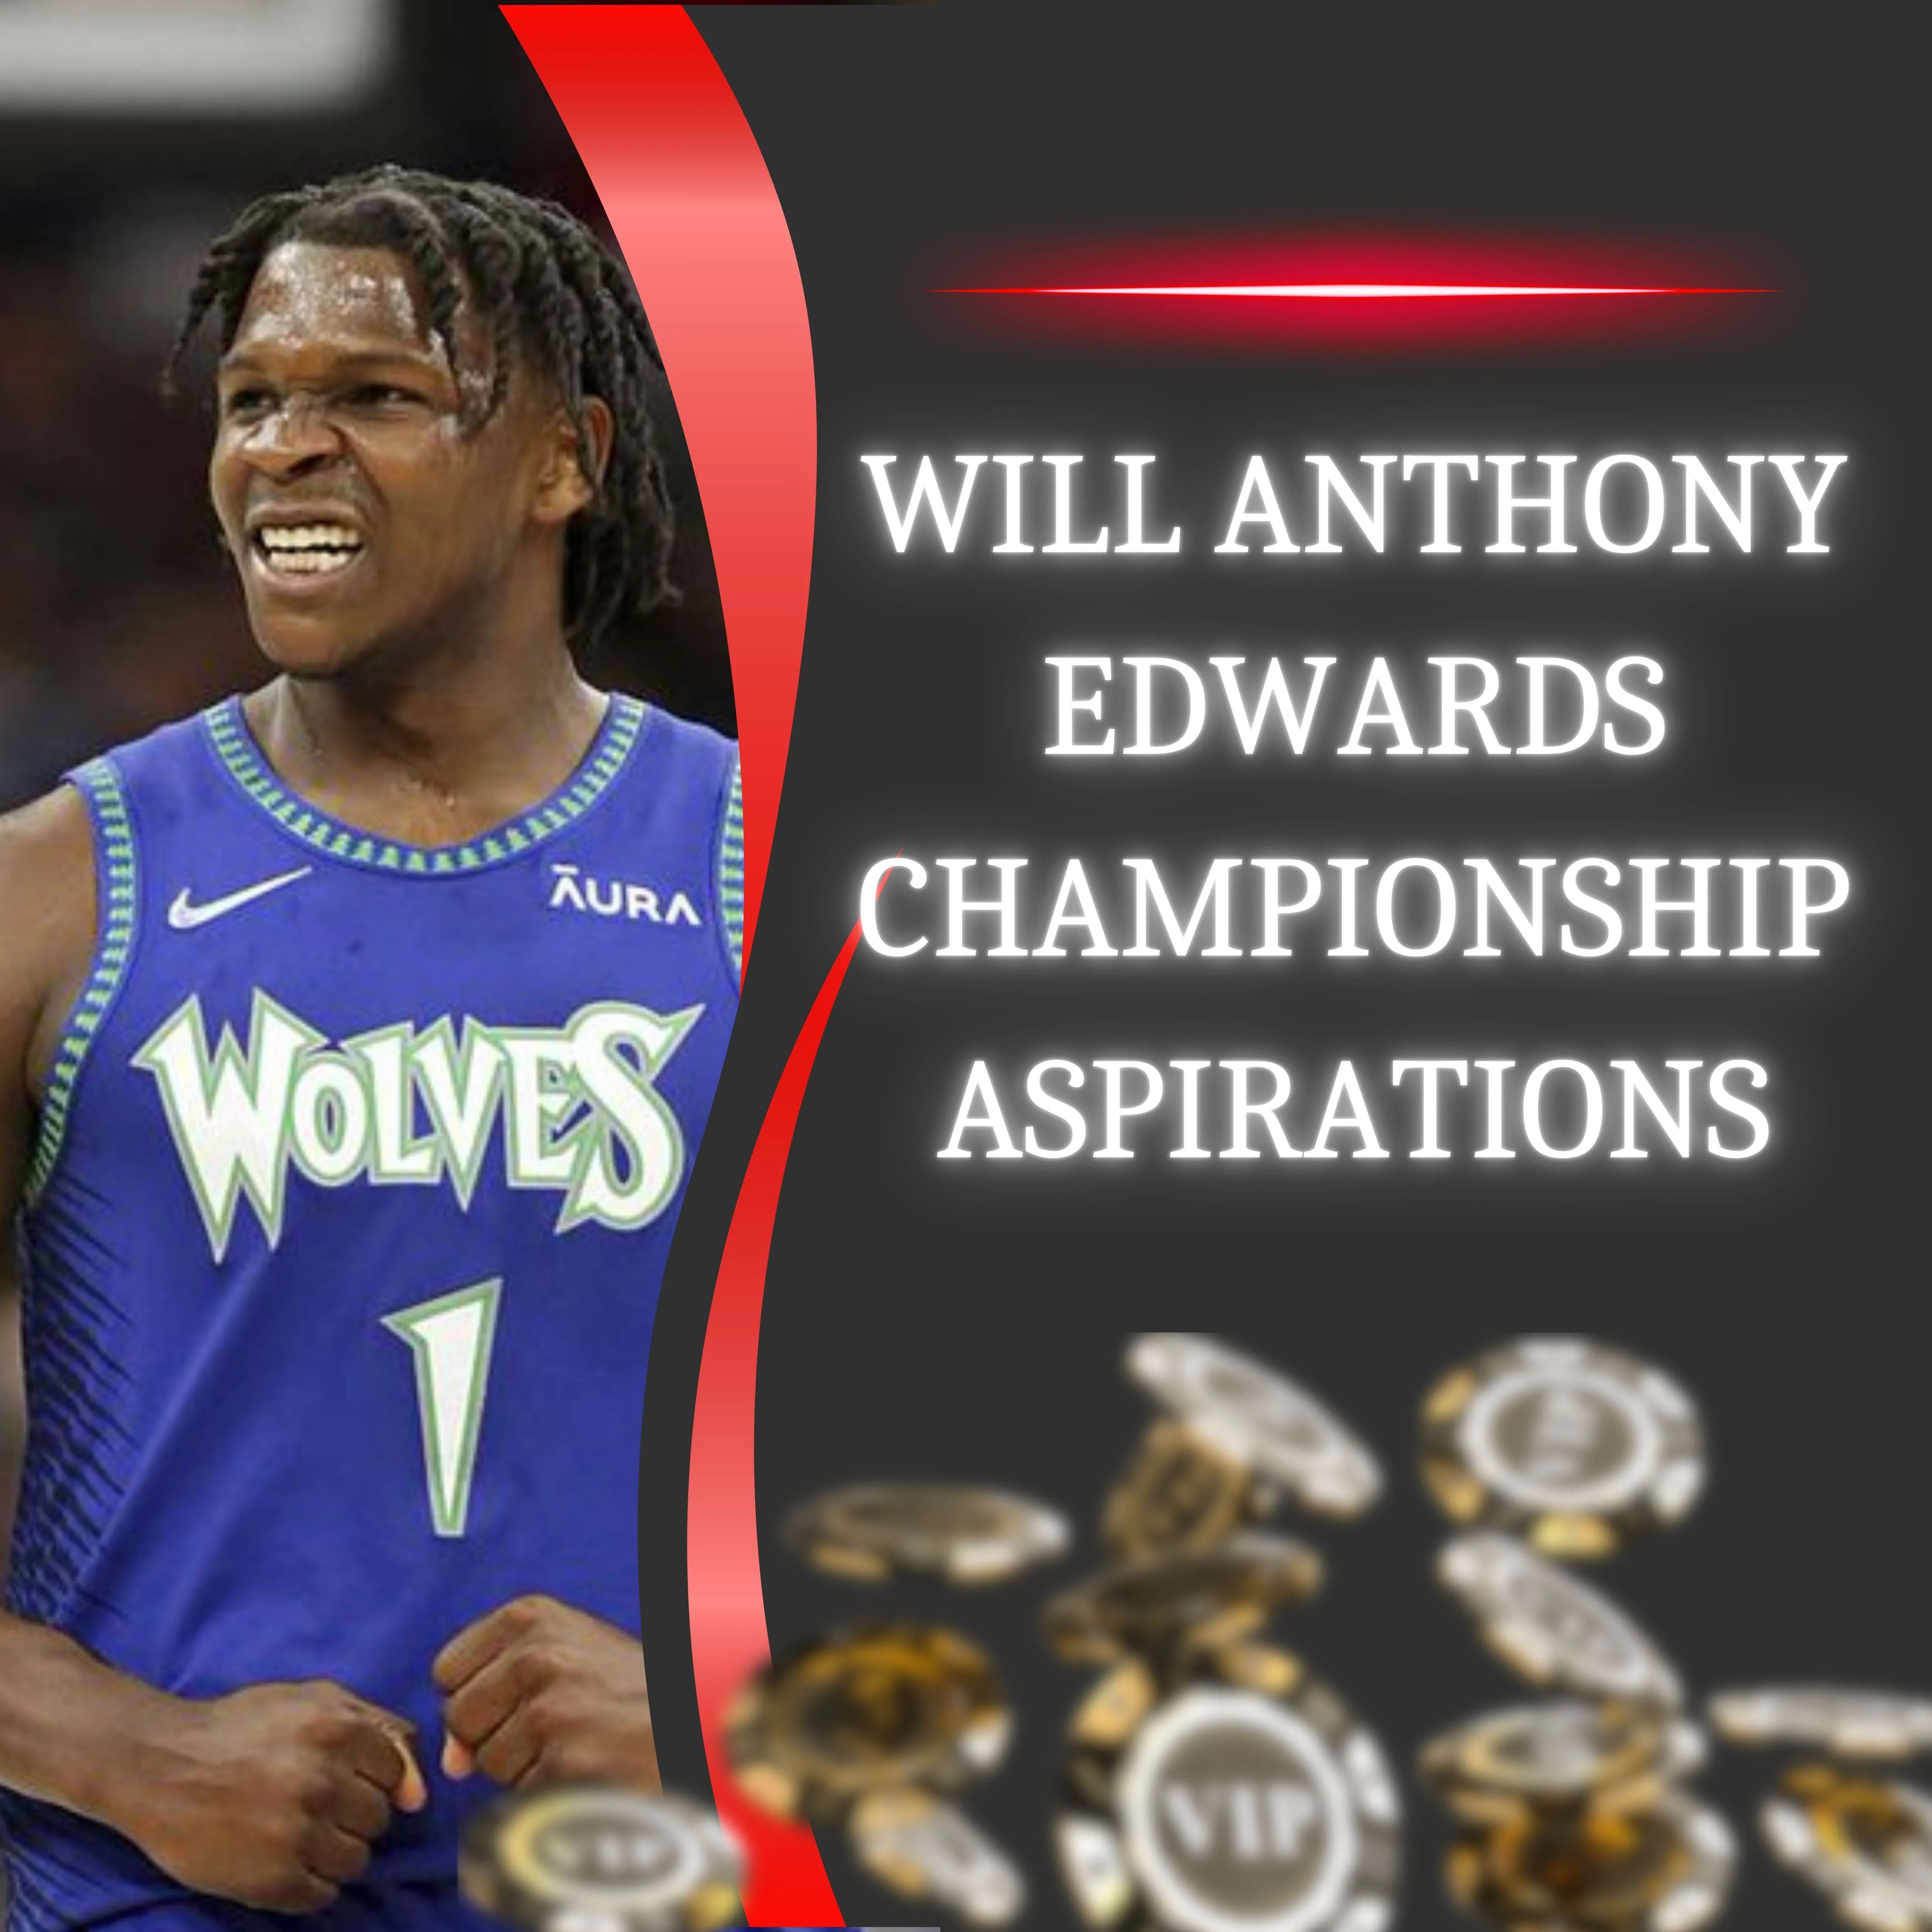 Will Anthony Edwards’ Youth Hinder the Timberwolves’ Championship Aspirations?